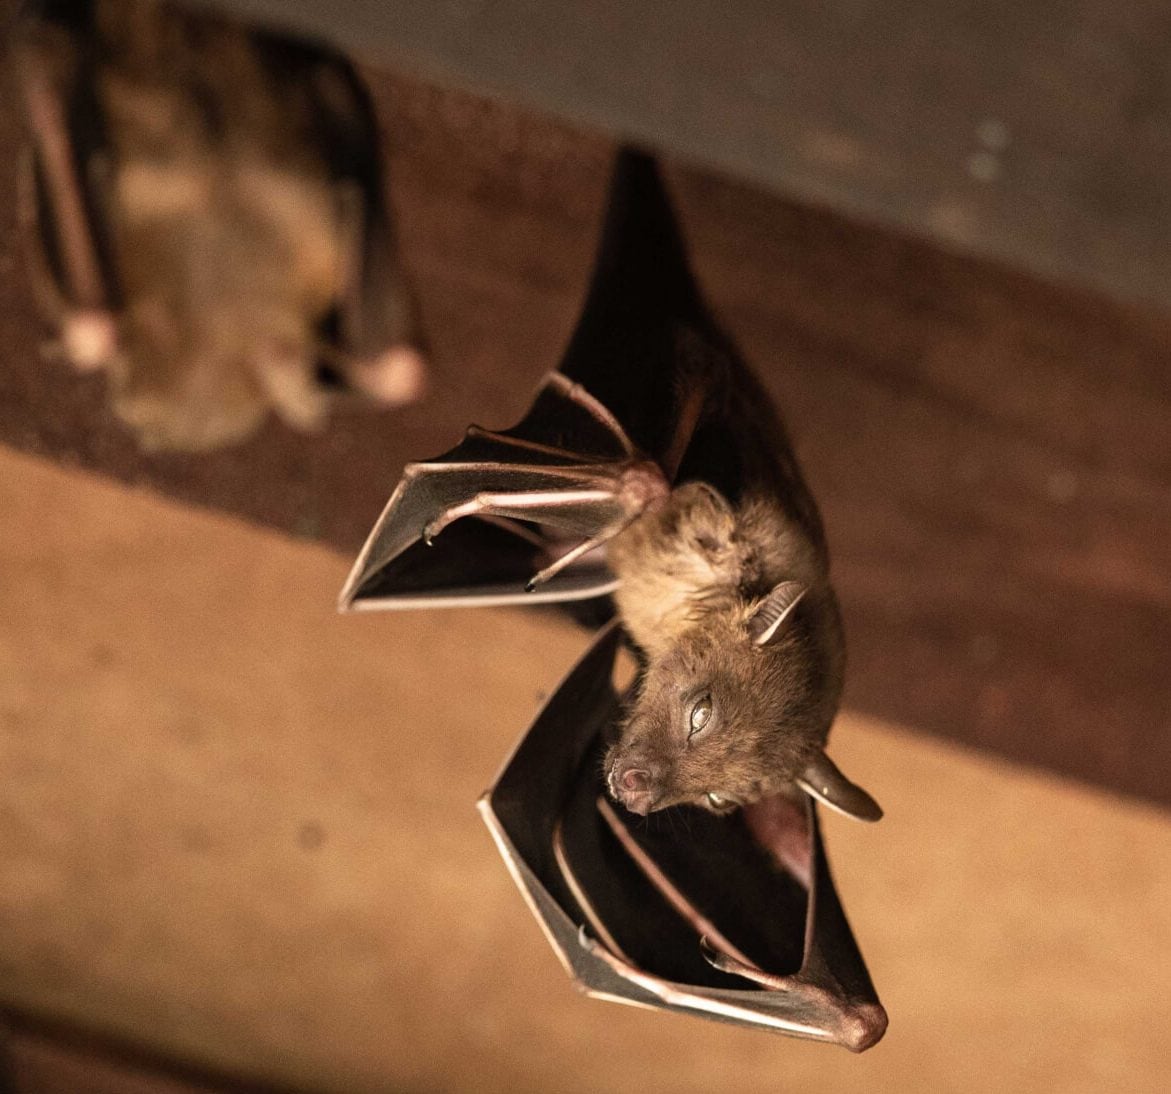 Expert bat removal services for a safe and humane solution in South Florida